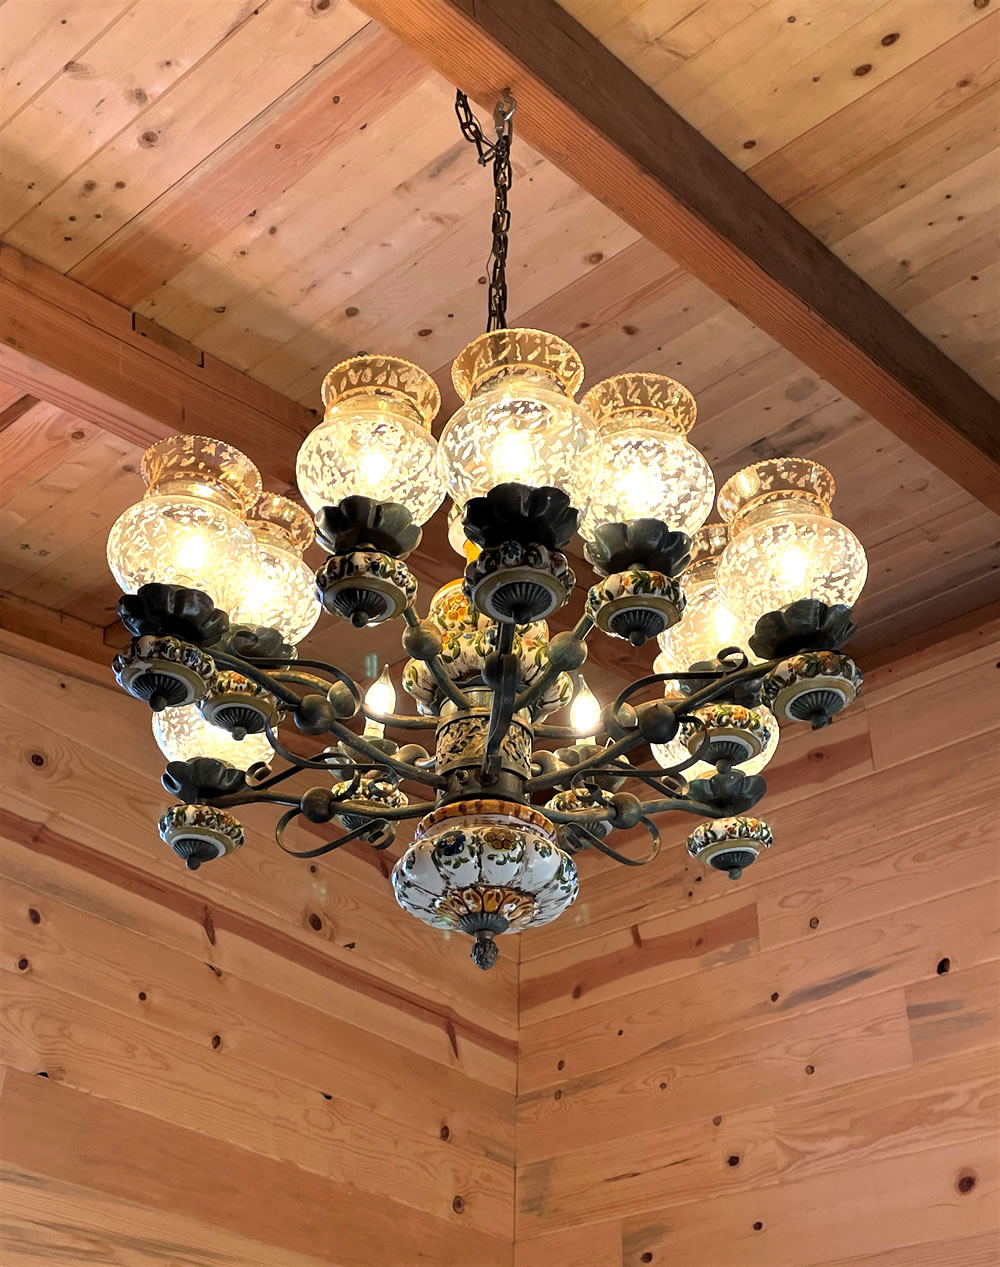 Chandelier hanging from wood-beamed ceiling. 